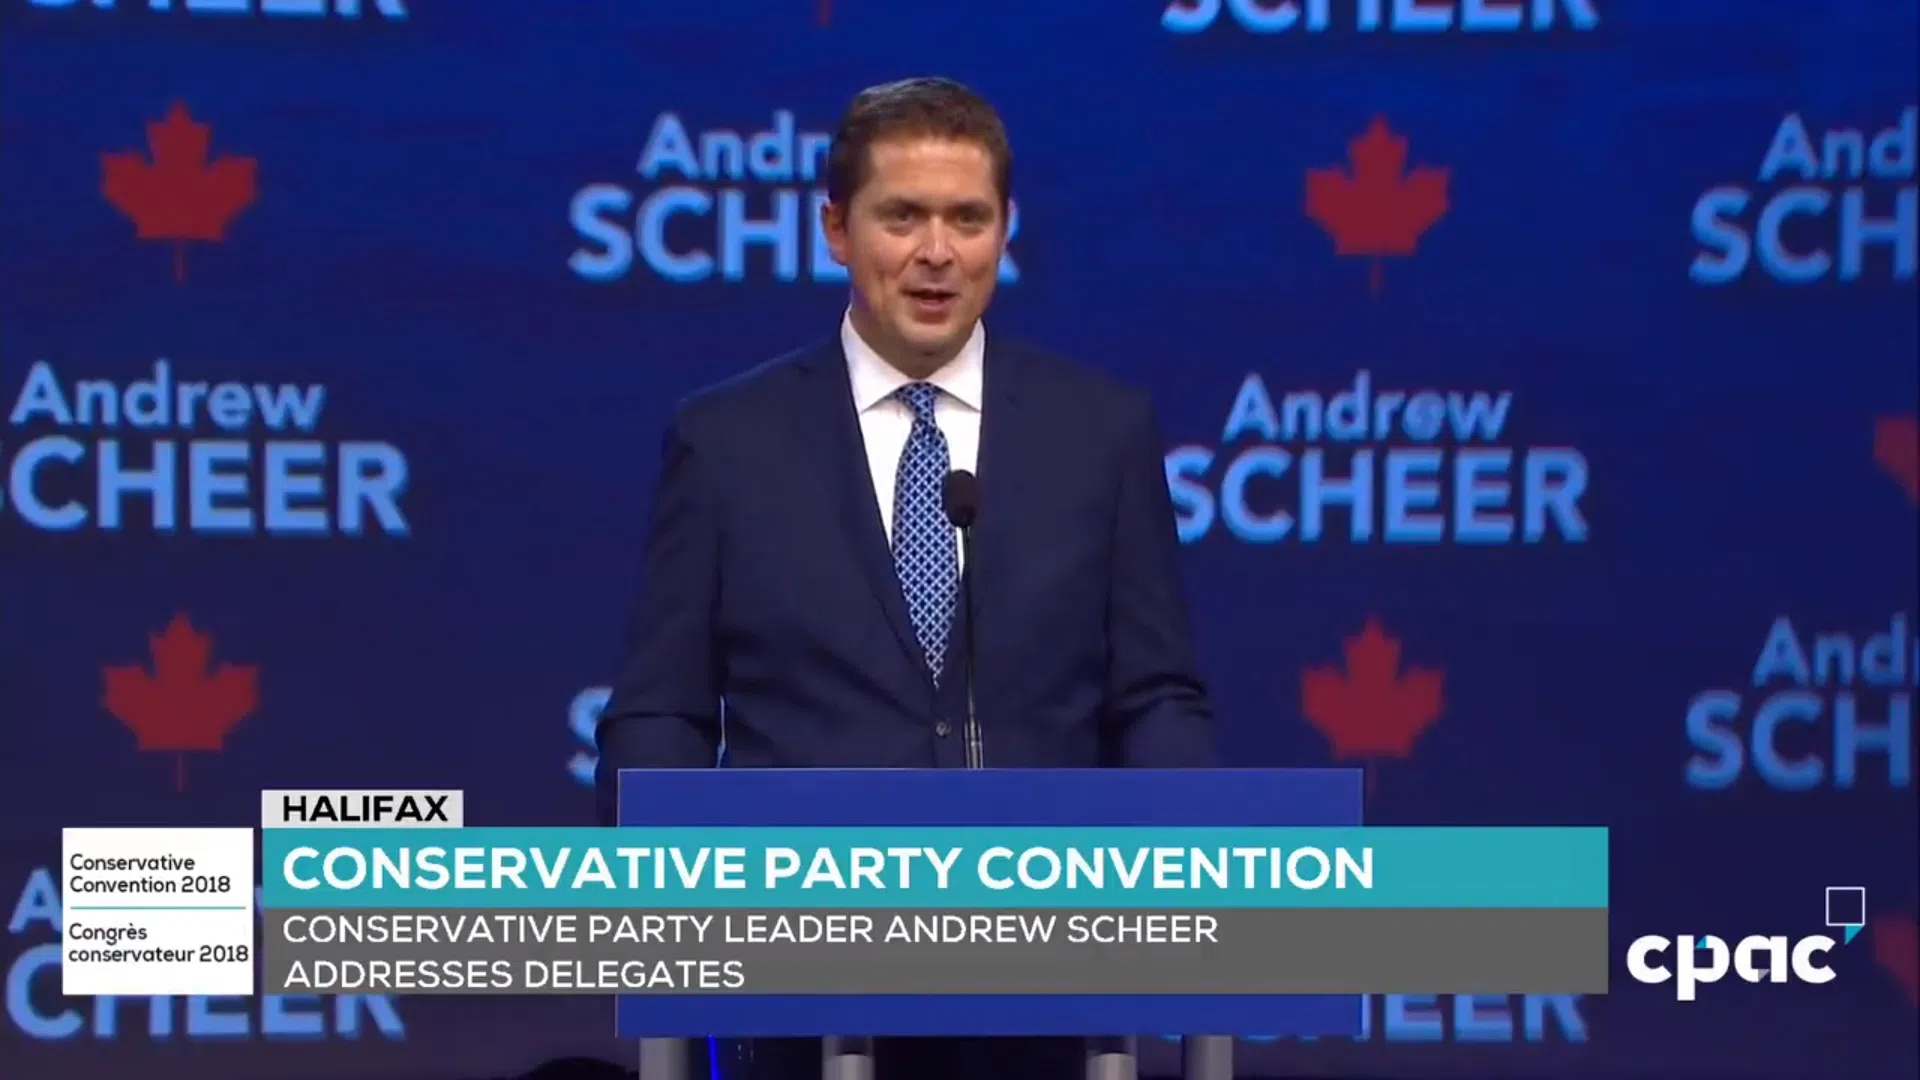 Andrew Scheer Addresses Conservative Party Convention